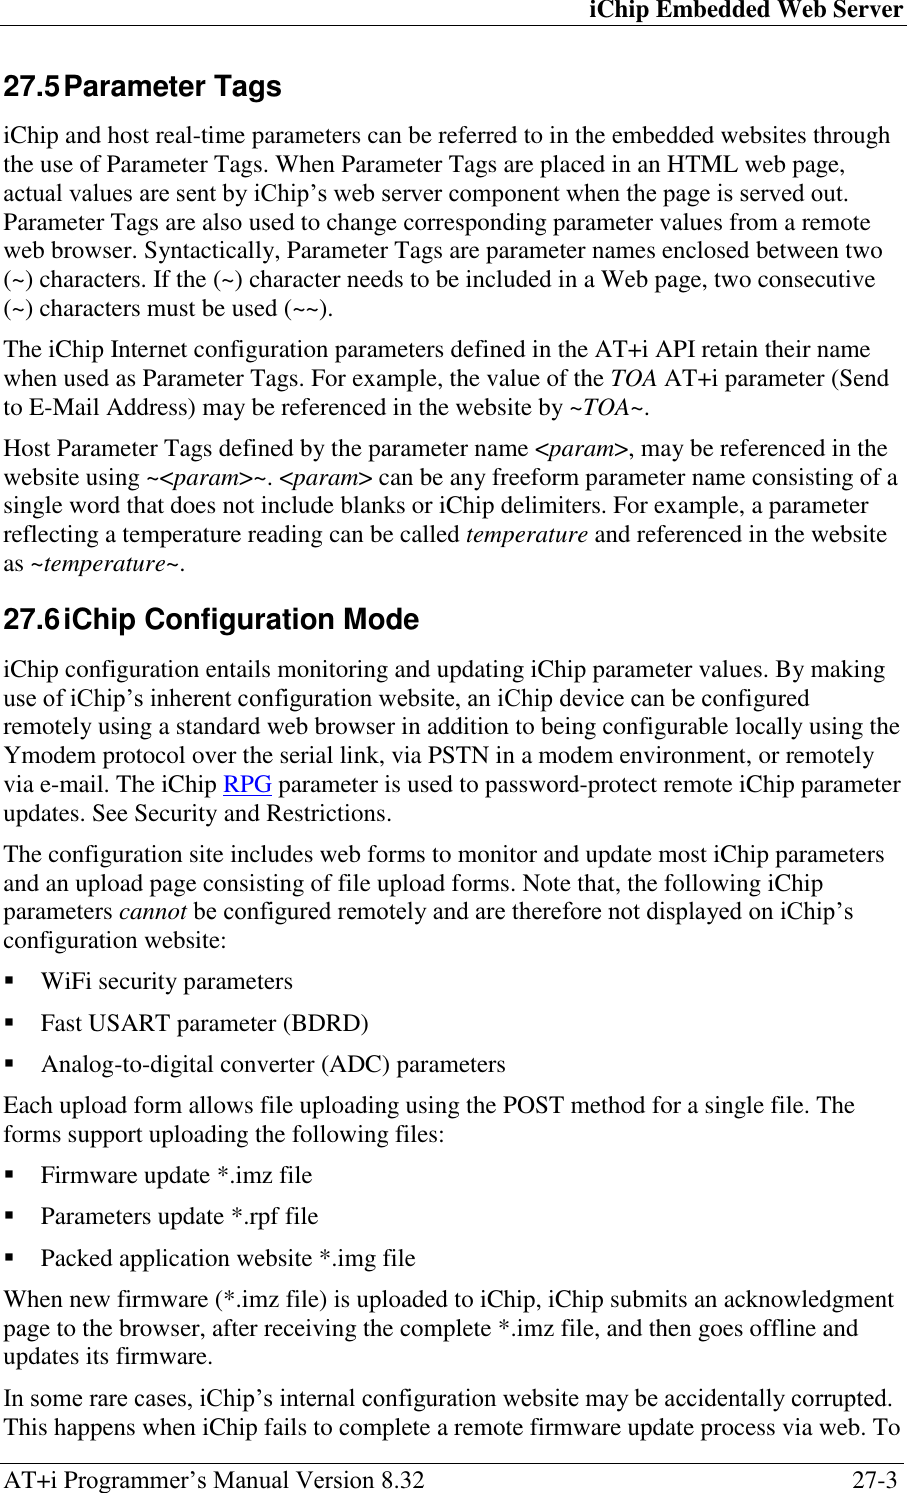 iChip Embedded Web Server AT+i Programmer‘s Manual Version 8.32  27-3 27.5 Parameter Tags iChip and host real-time parameters can be referred to in the embedded websites through the use of Parameter Tags. When Parameter Tags are placed in an HTML web page, actual values are sent by iChip‘s web server component when the page is served out. Parameter Tags are also used to change corresponding parameter values from a remote web browser. Syntactically, Parameter Tags are parameter names enclosed between two (~) characters. If the (~) character needs to be included in a Web page, two consecutive (~) characters must be used (~~). The iChip Internet configuration parameters defined in the AT+i API retain their name when used as Parameter Tags. For example, the value of the TOA AT+i parameter (Send to E-Mail Address) may be referenced in the website by ~TOA~. Host Parameter Tags defined by the parameter name &lt;param&gt;, may be referenced in the website using ~&lt;param&gt;~. &lt;param&gt; can be any freeform parameter name consisting of a single word that does not include blanks or iChip delimiters. For example, a parameter reflecting a temperature reading can be called temperature and referenced in the website as ~temperature~. 27.6 iChip Configuration Mode iChip configuration entails monitoring and updating iChip parameter values. By making use of iChip‘s inherent configuration website, an iChip device can be configured remotely using a standard web browser in addition to being configurable locally using the Ymodem protocol over the serial link, via PSTN in a modem environment, or remotely via e-mail. The iChip RPG parameter is used to password-protect remote iChip parameter updates. See Security and Restrictions. The configuration site includes web forms to monitor and update most iChip parameters and an upload page consisting of file upload forms. Note that, the following iChip parameters cannot be configured remotely and are therefore not displayed on iChip‘s configuration website:  WiFi security parameters  Fast USART parameter (BDRD)  Analog-to-digital converter (ADC) parameters Each upload form allows file uploading using the POST method for a single file. The forms support uploading the following files:  Firmware update *.imz file  Parameters update *.rpf file  Packed application website *.img file When new firmware (*.imz file) is uploaded to iChip, iChip submits an acknowledgment page to the browser, after receiving the complete *.imz file, and then goes offline and updates its firmware. In some rare cases, iChip‘s internal configuration website may be accidentally corrupted. This happens when iChip fails to complete a remote firmware update process via web. To 